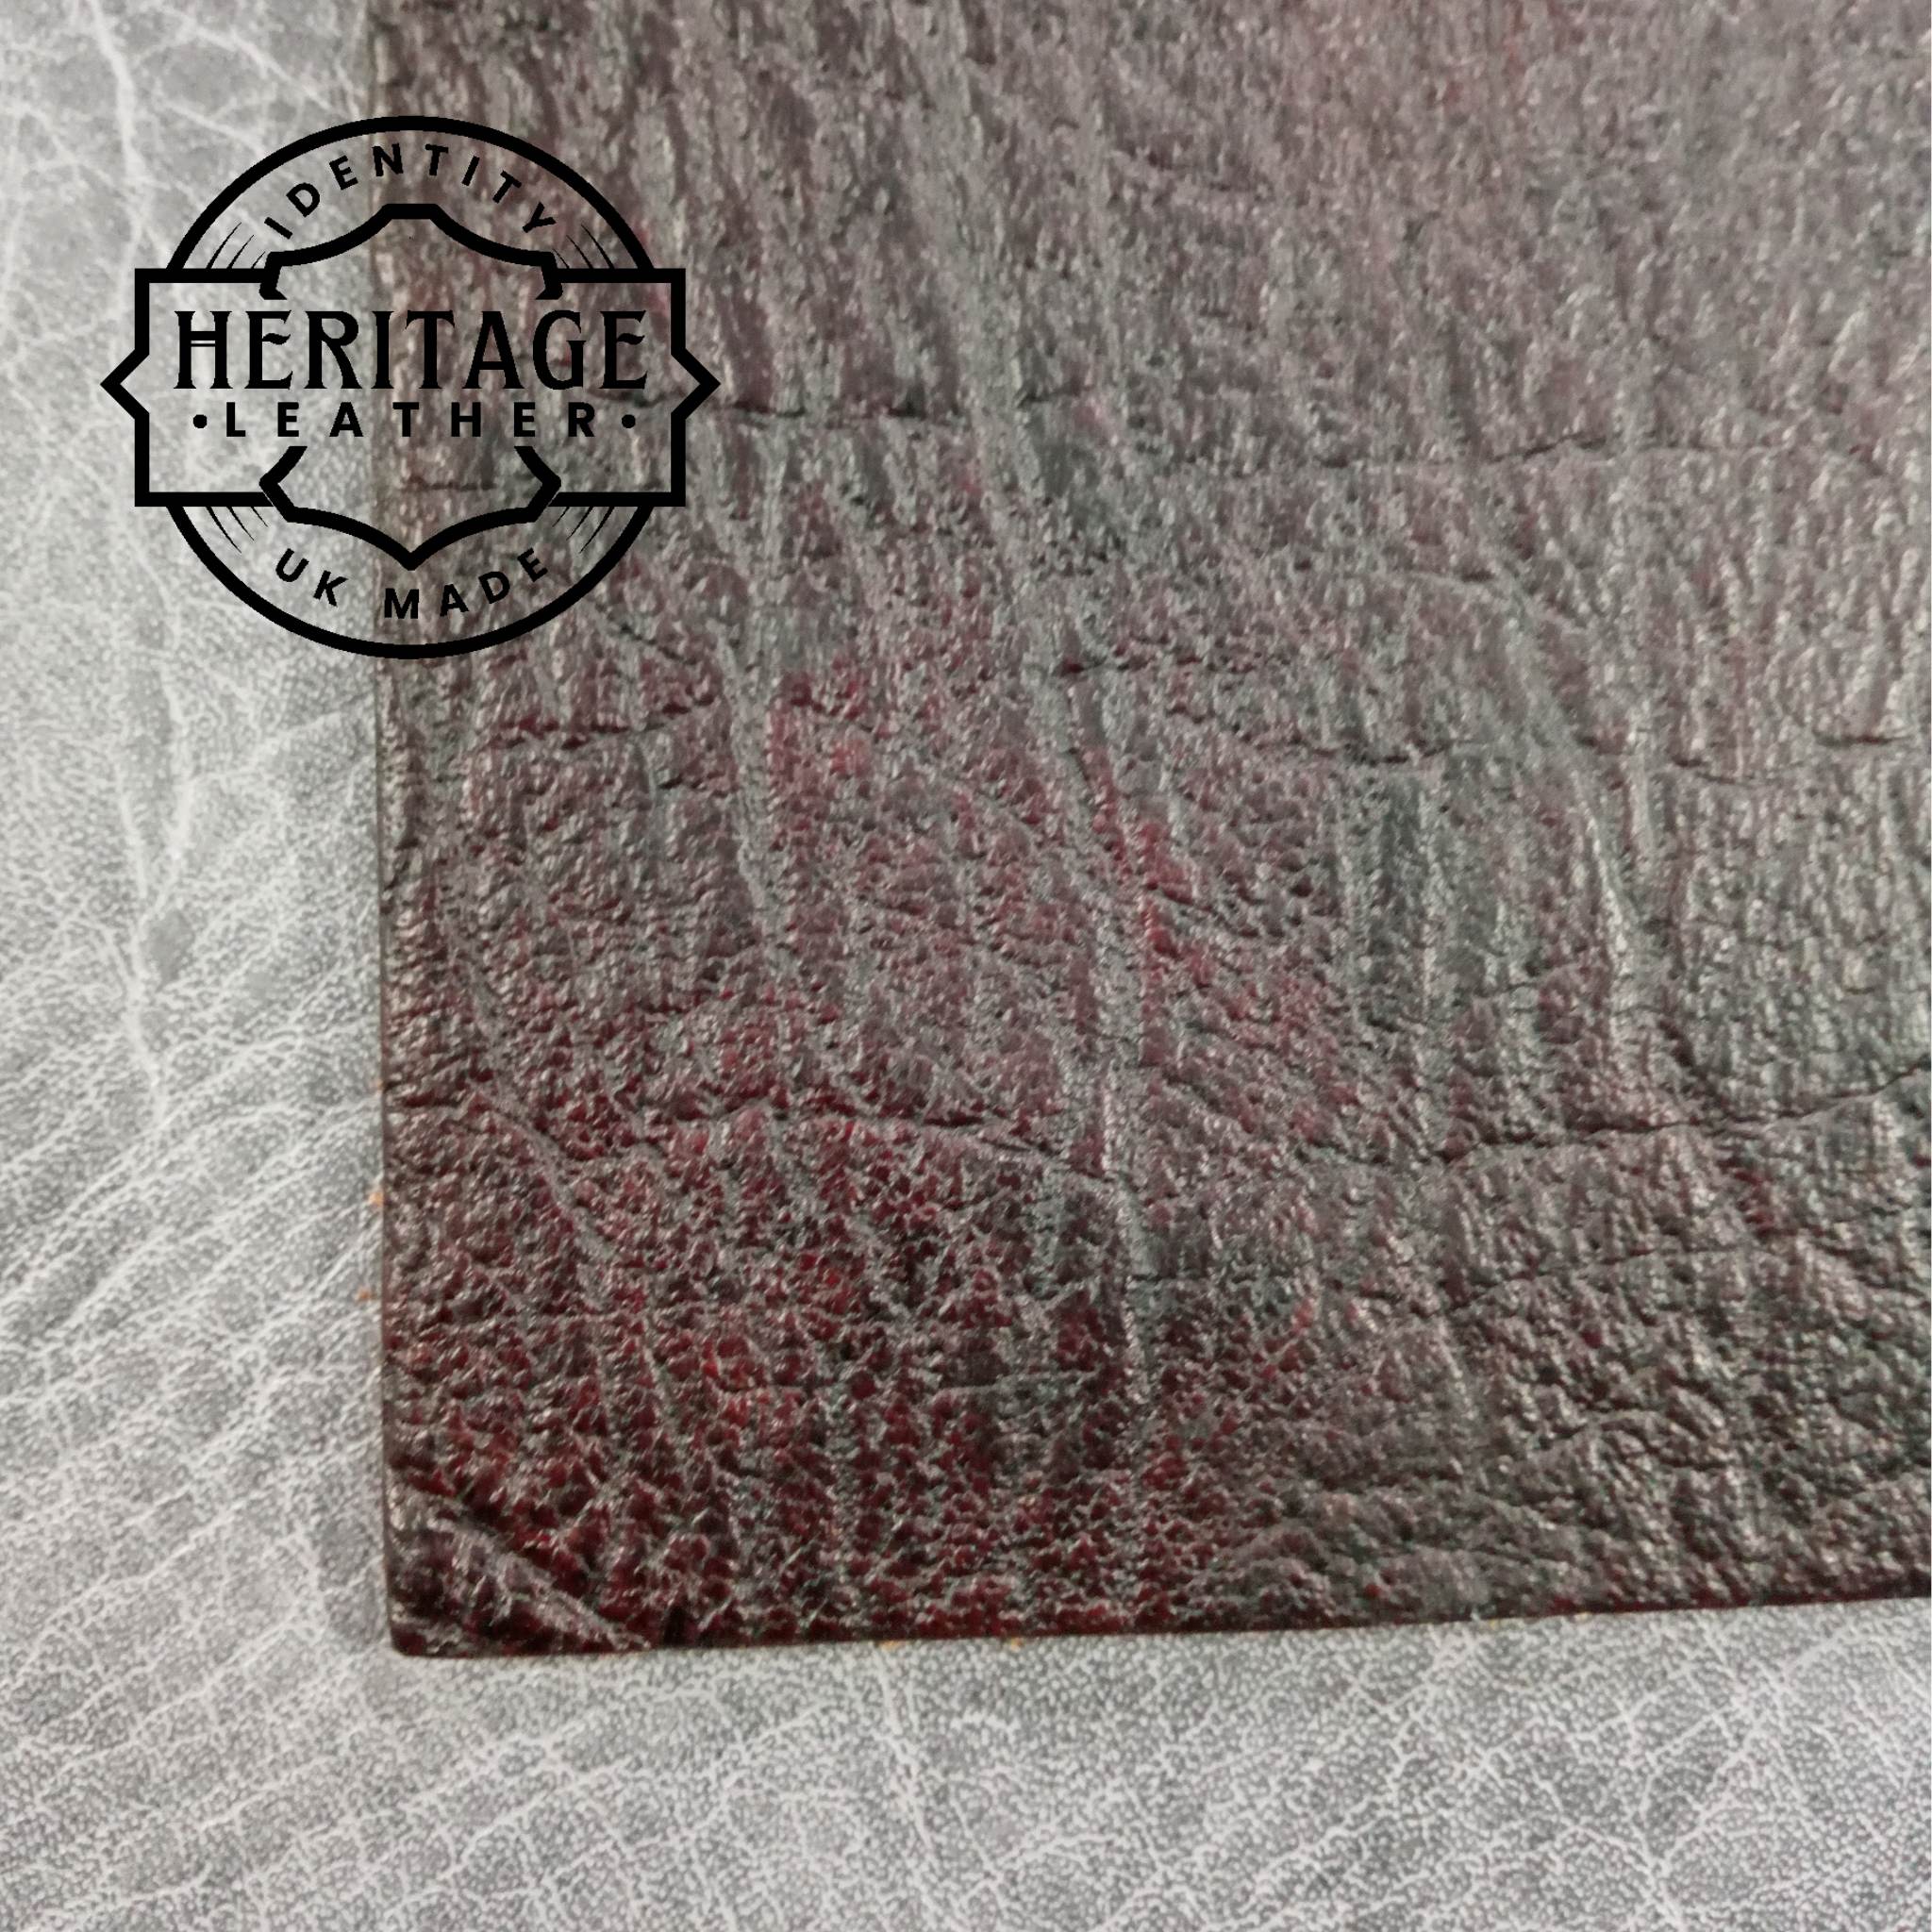 A3 leather cuts taken from the Heritage collection of leather sourced from the old Clayton's tannery in Chesterfield. Dark Brown Dyed Coloured Textured Grain Leather - around 4mm , ideal for knife sheaths